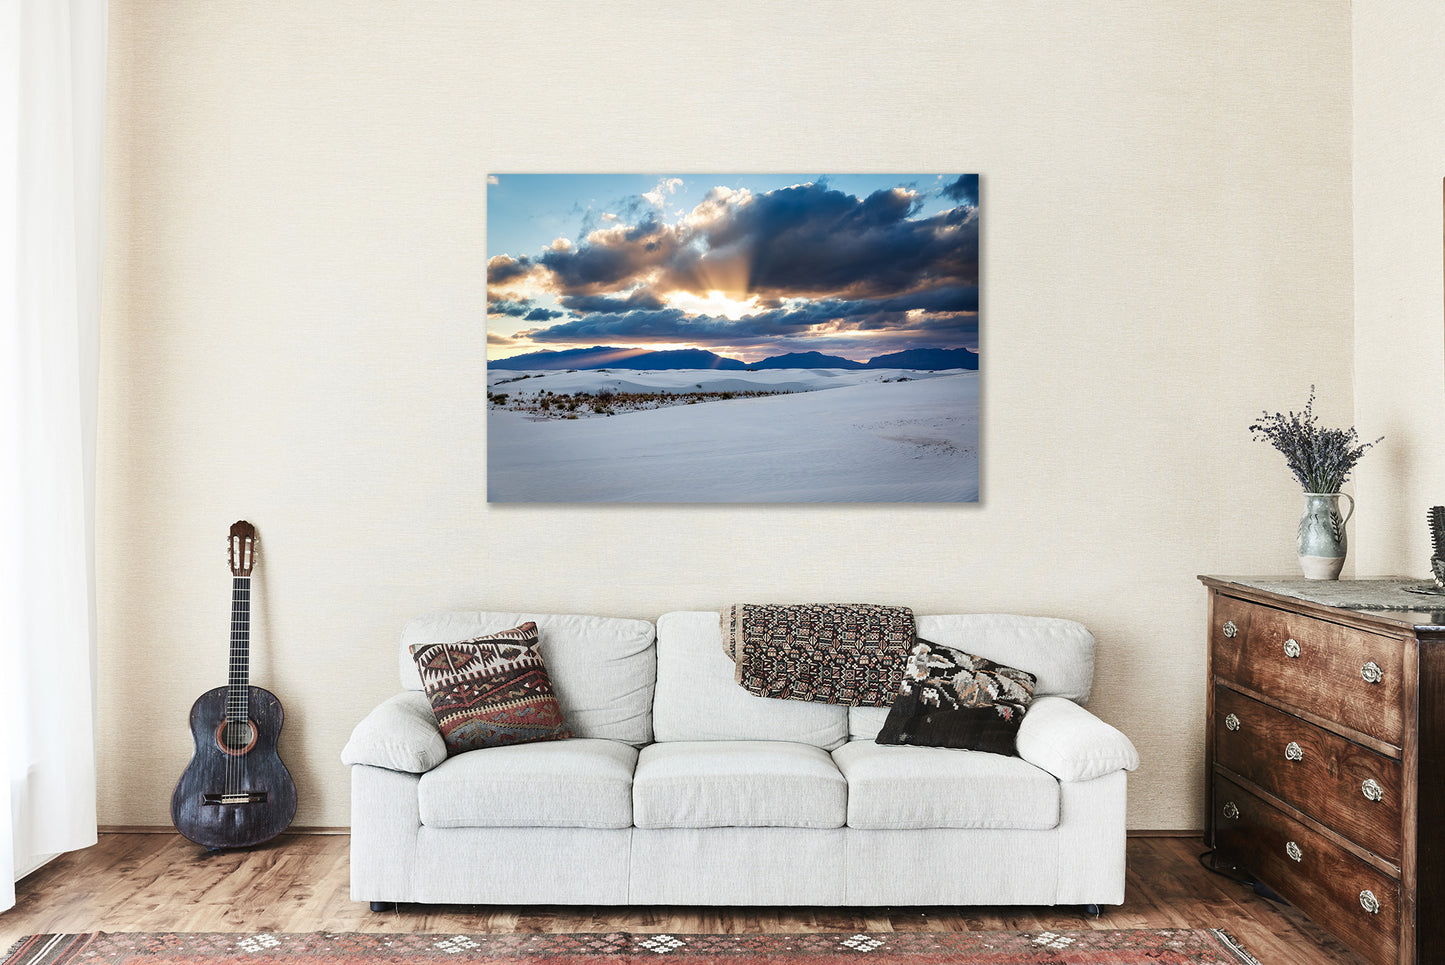 Canvas Wall Art - Gallery Wrap of Sunbeams Over Mountains at White Sands National Park New Mexico - Southwest Photography Artwork Decor